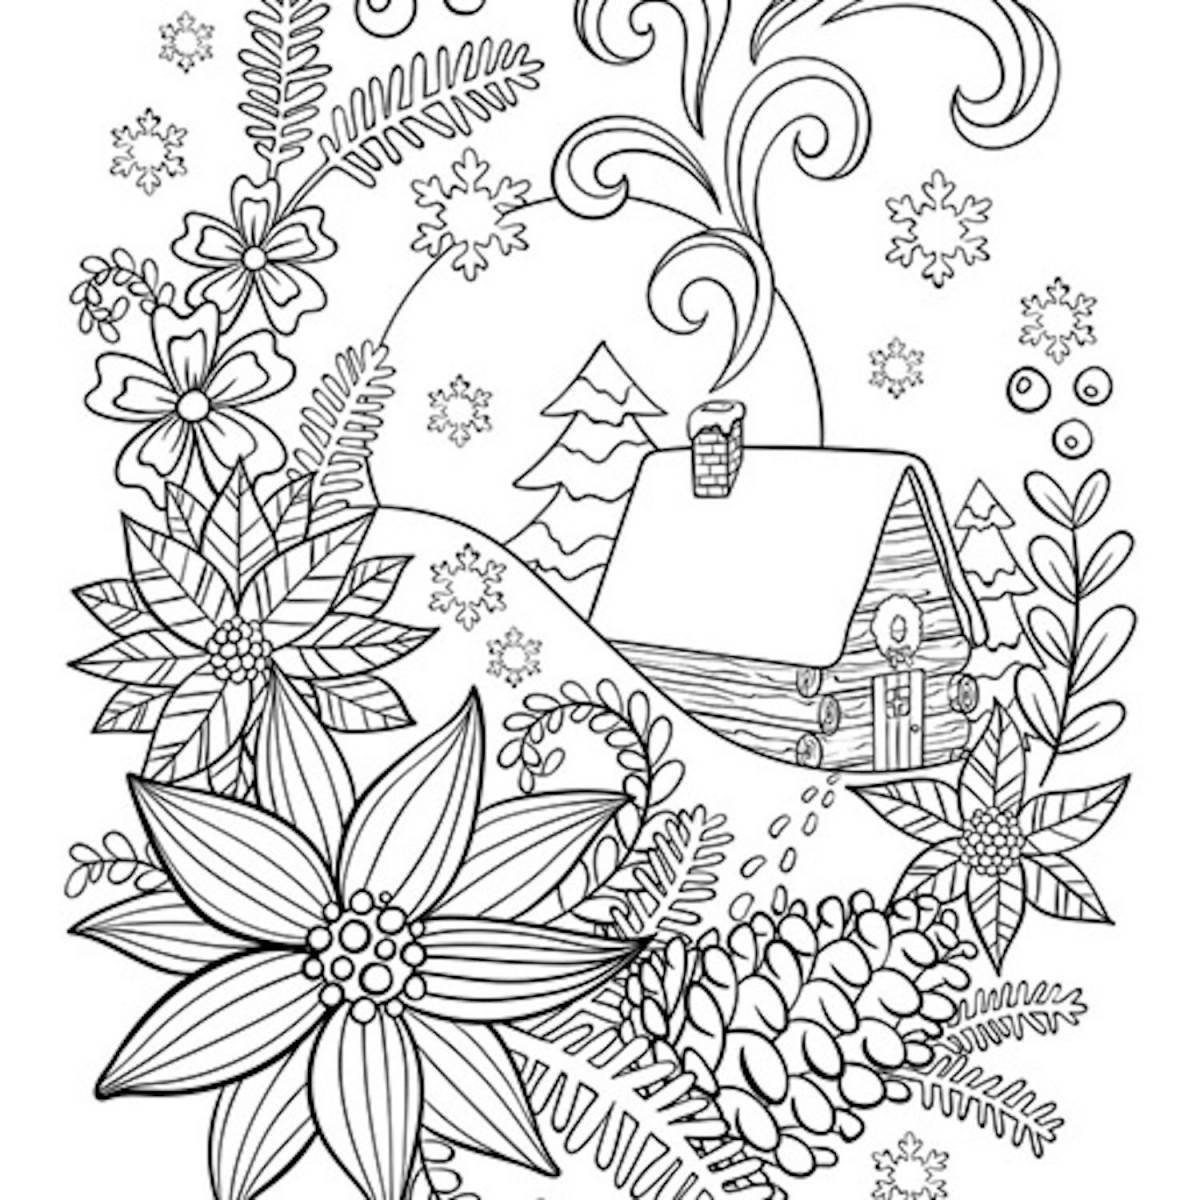 Coloring pages with playful winter patterns for kids